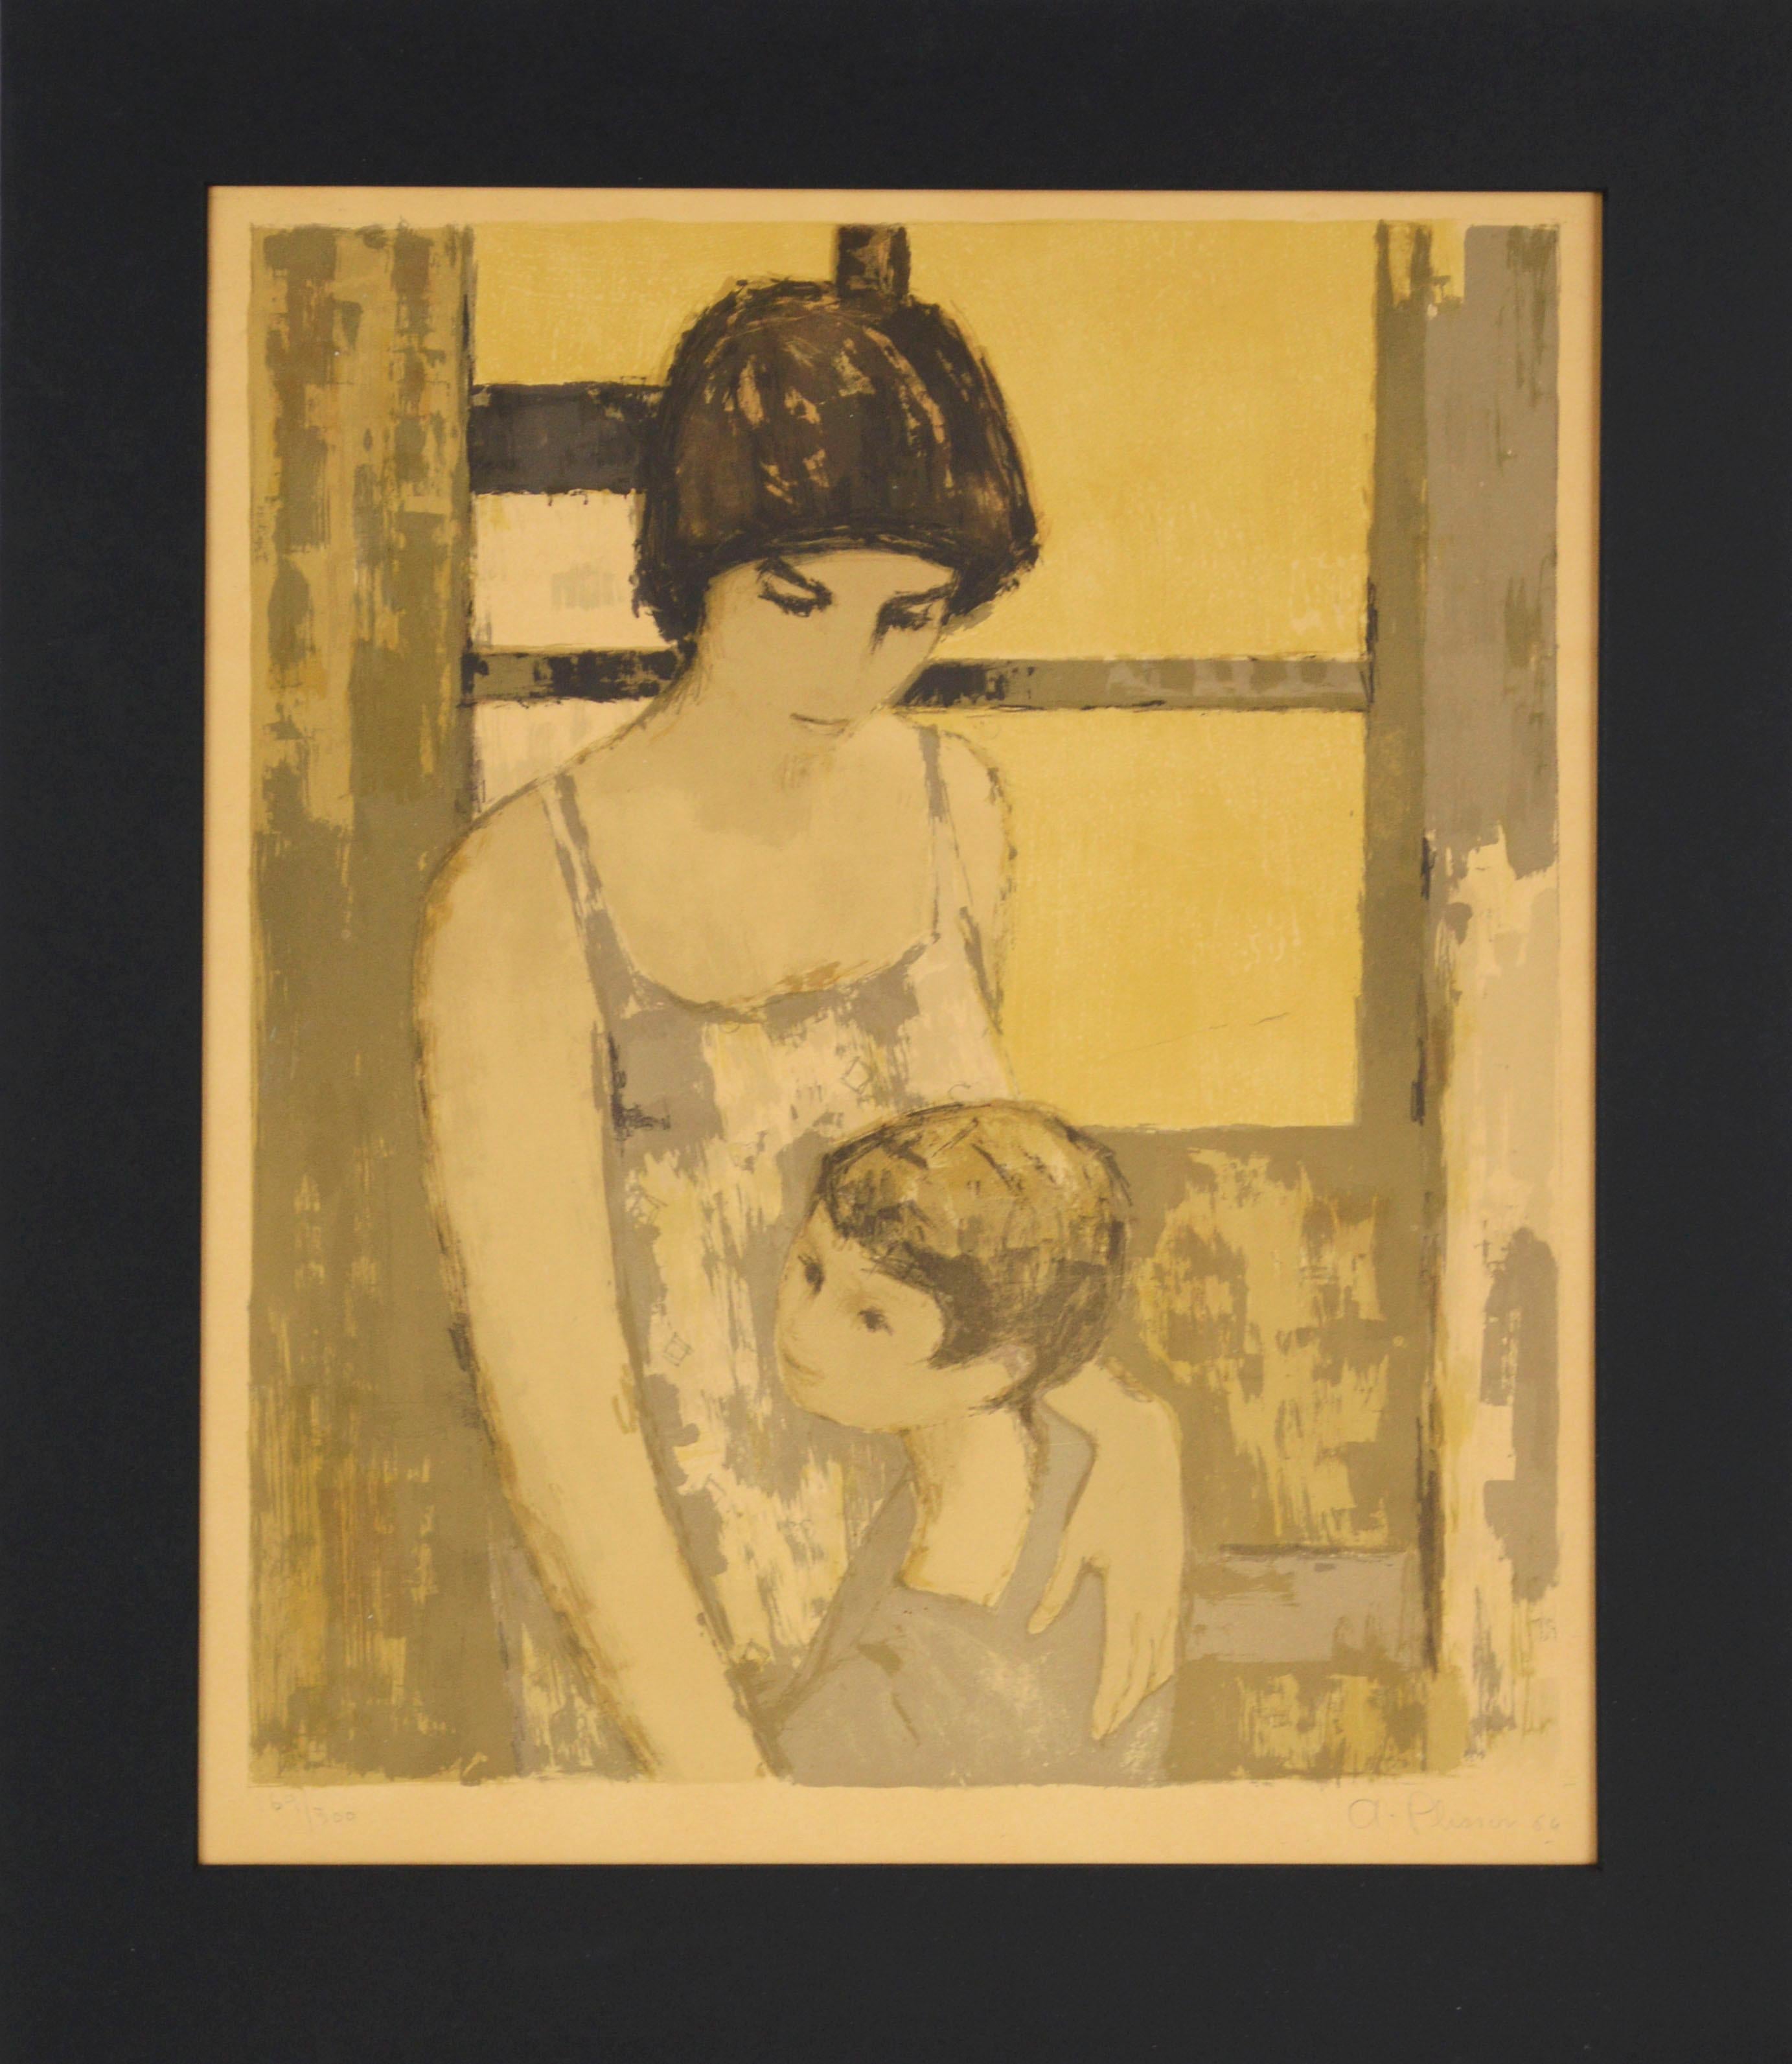 Andre Plisson Figurative Print - Mother and Child, Midcentury Modern Figurative Screenprint, Signed 169/300